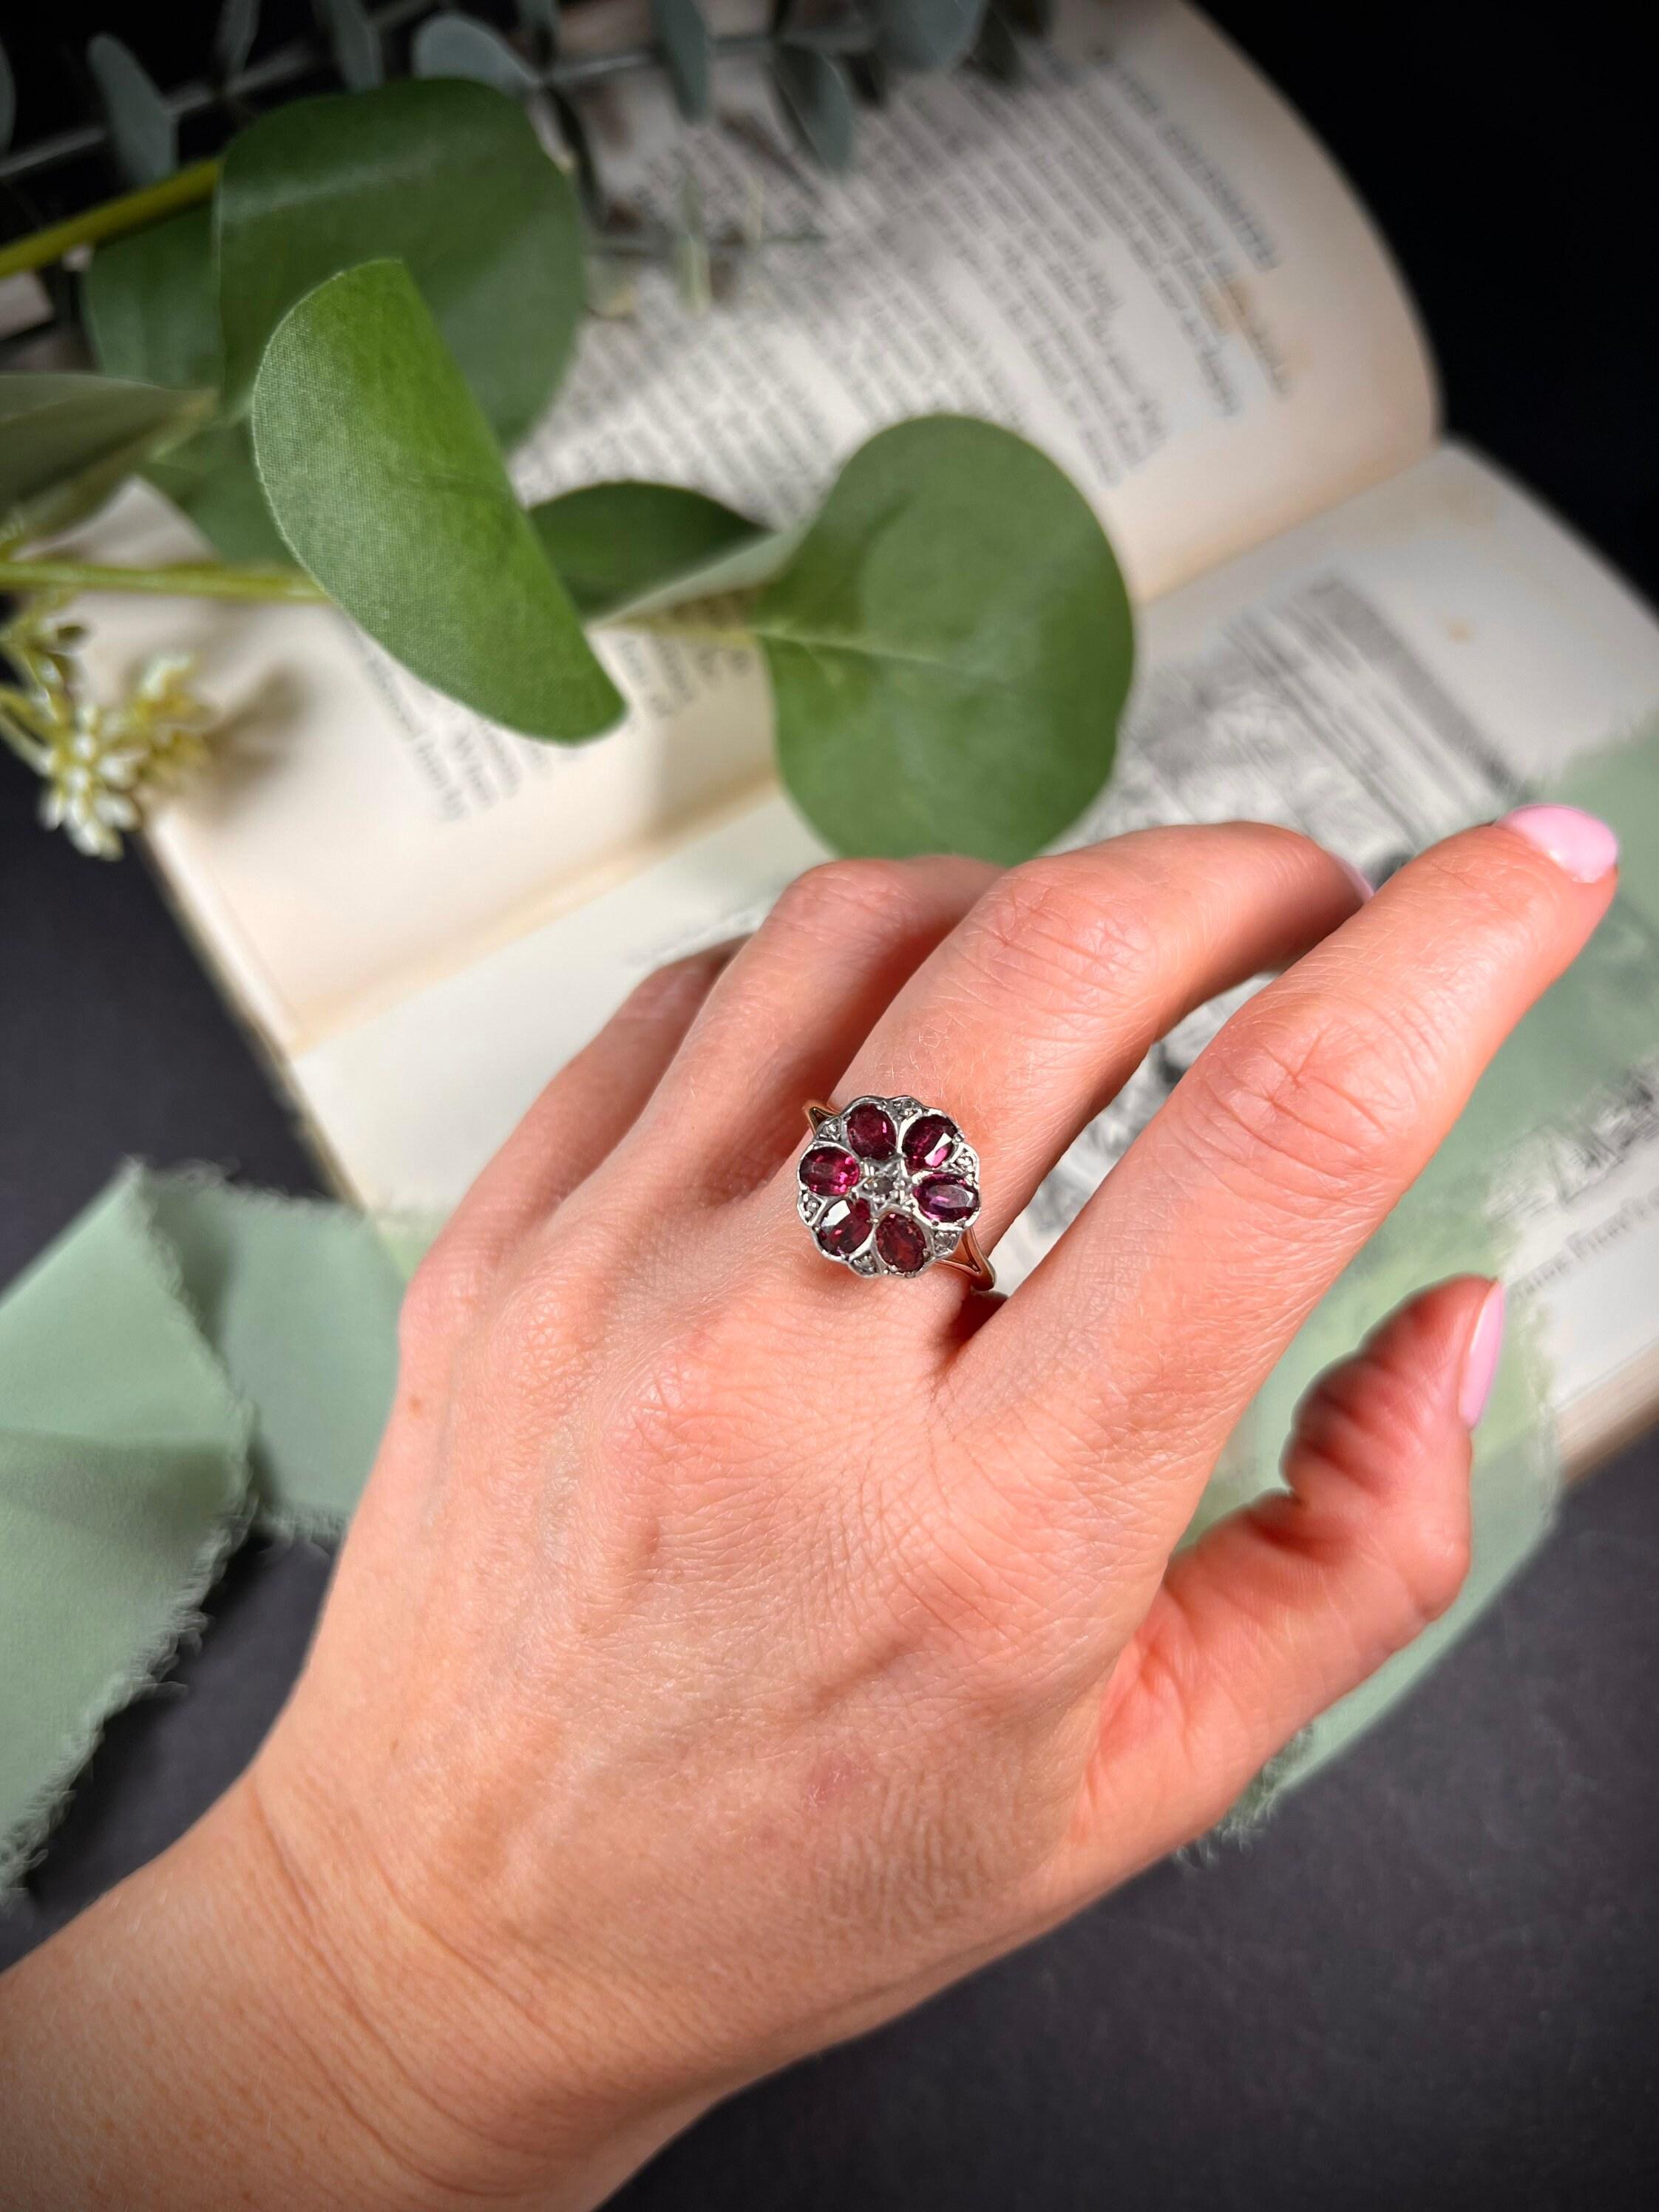 9ct Gold Garnet & Diamond Daisy Cluster Ring Set with Faceted Garnet Petals   For Sale 3